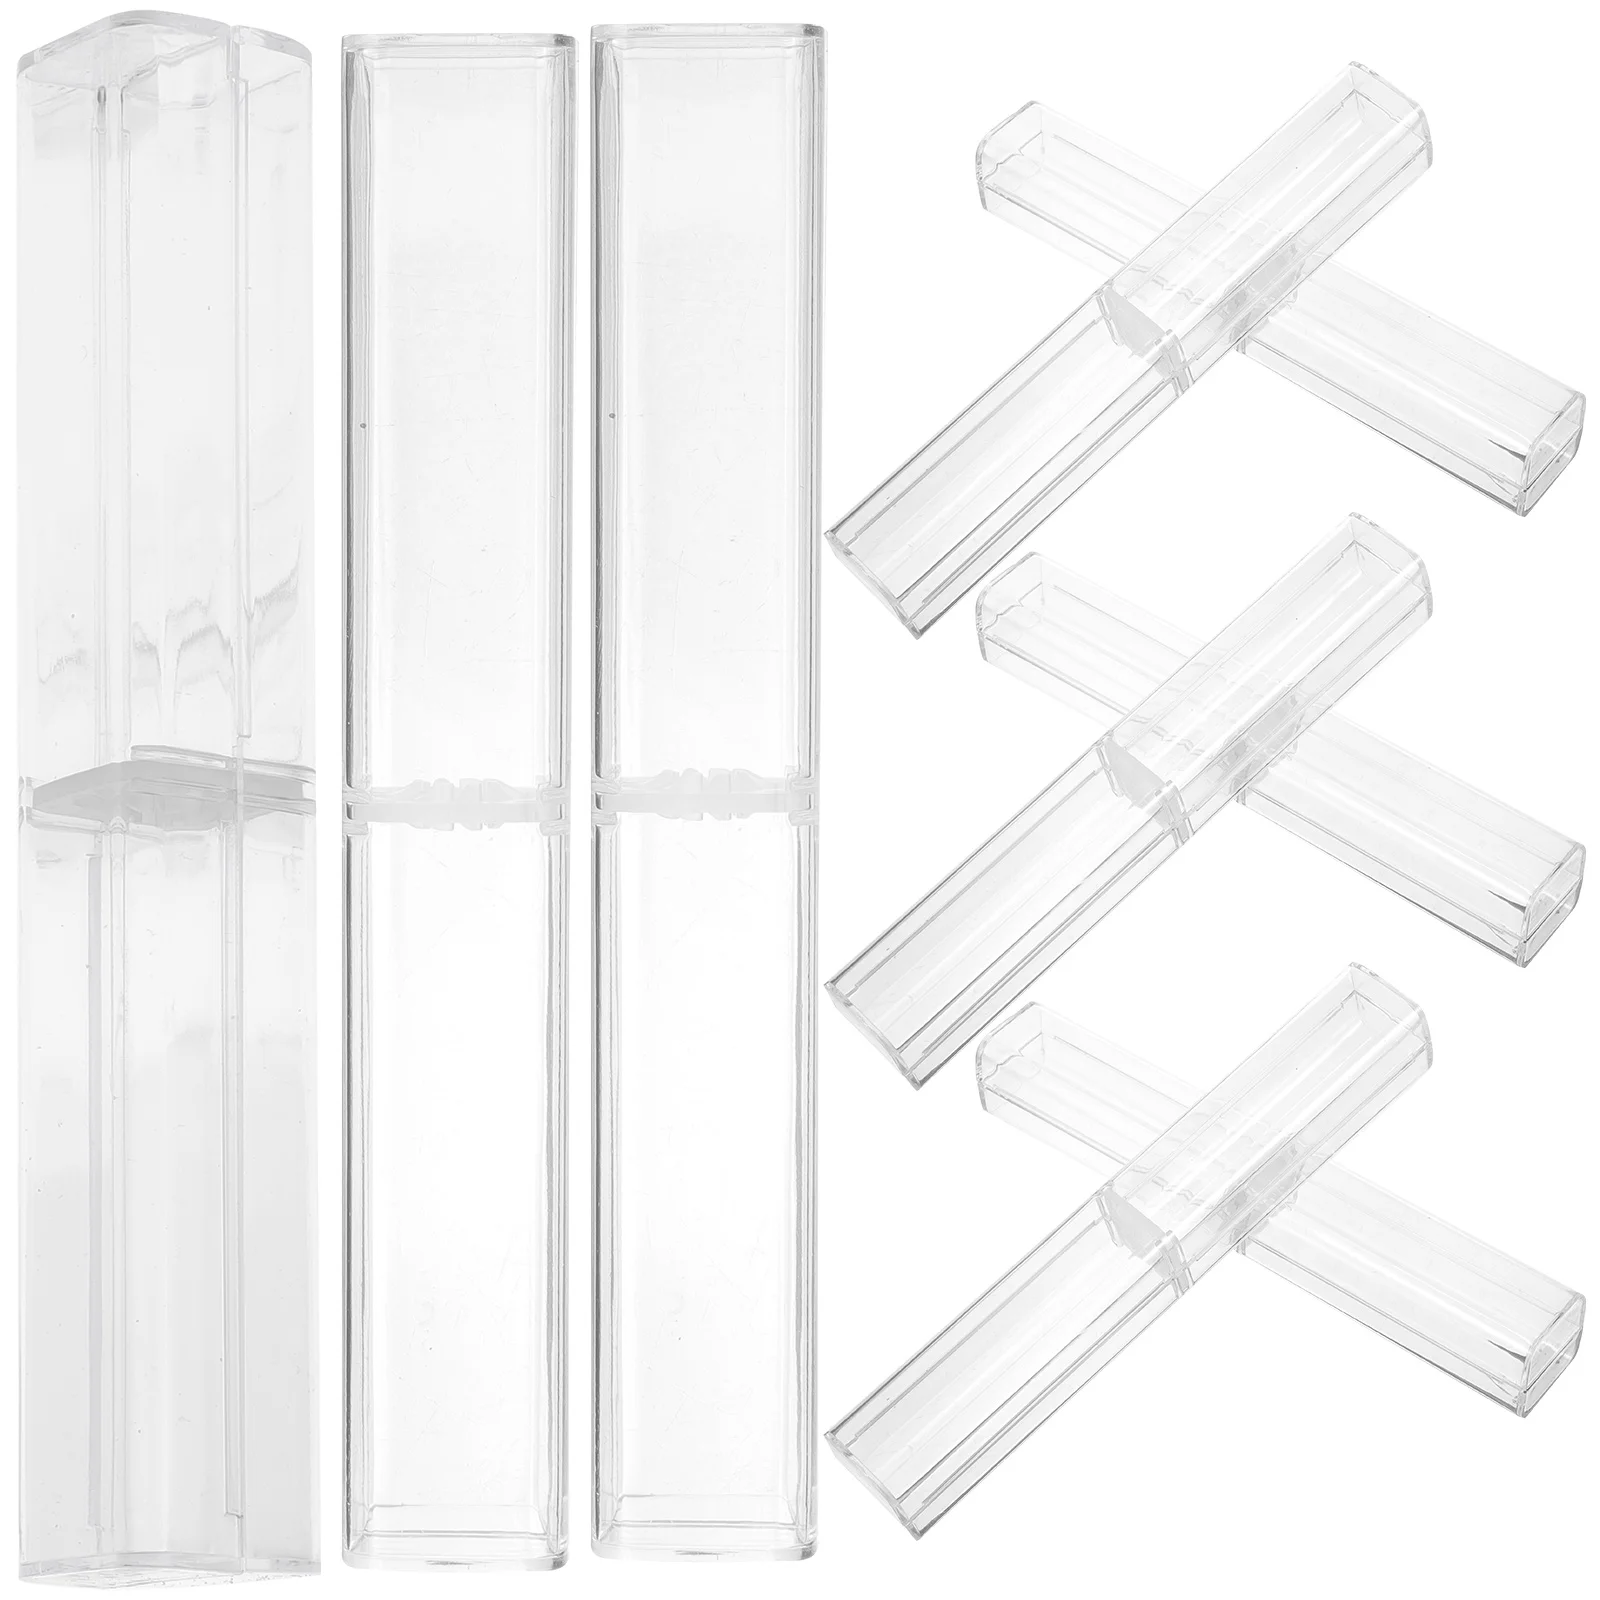 10 Pcs Students Pen Holder Clear Display Case Clear Pen Boxes Pen Container Painting Pencils Cases Clear Container